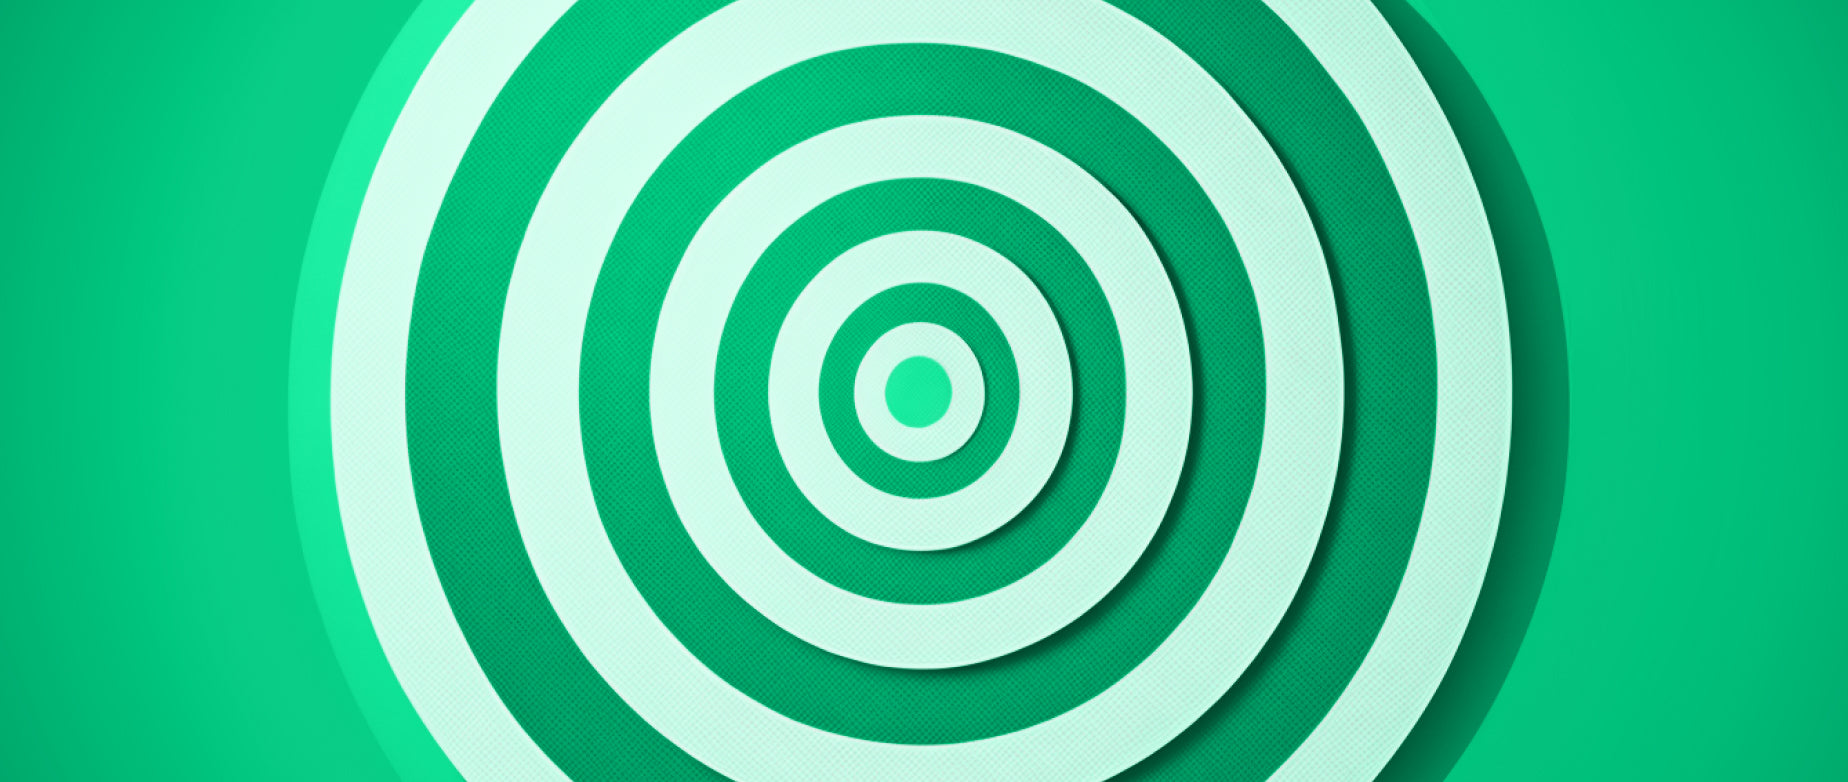 a series of concentric circles: brand positioning